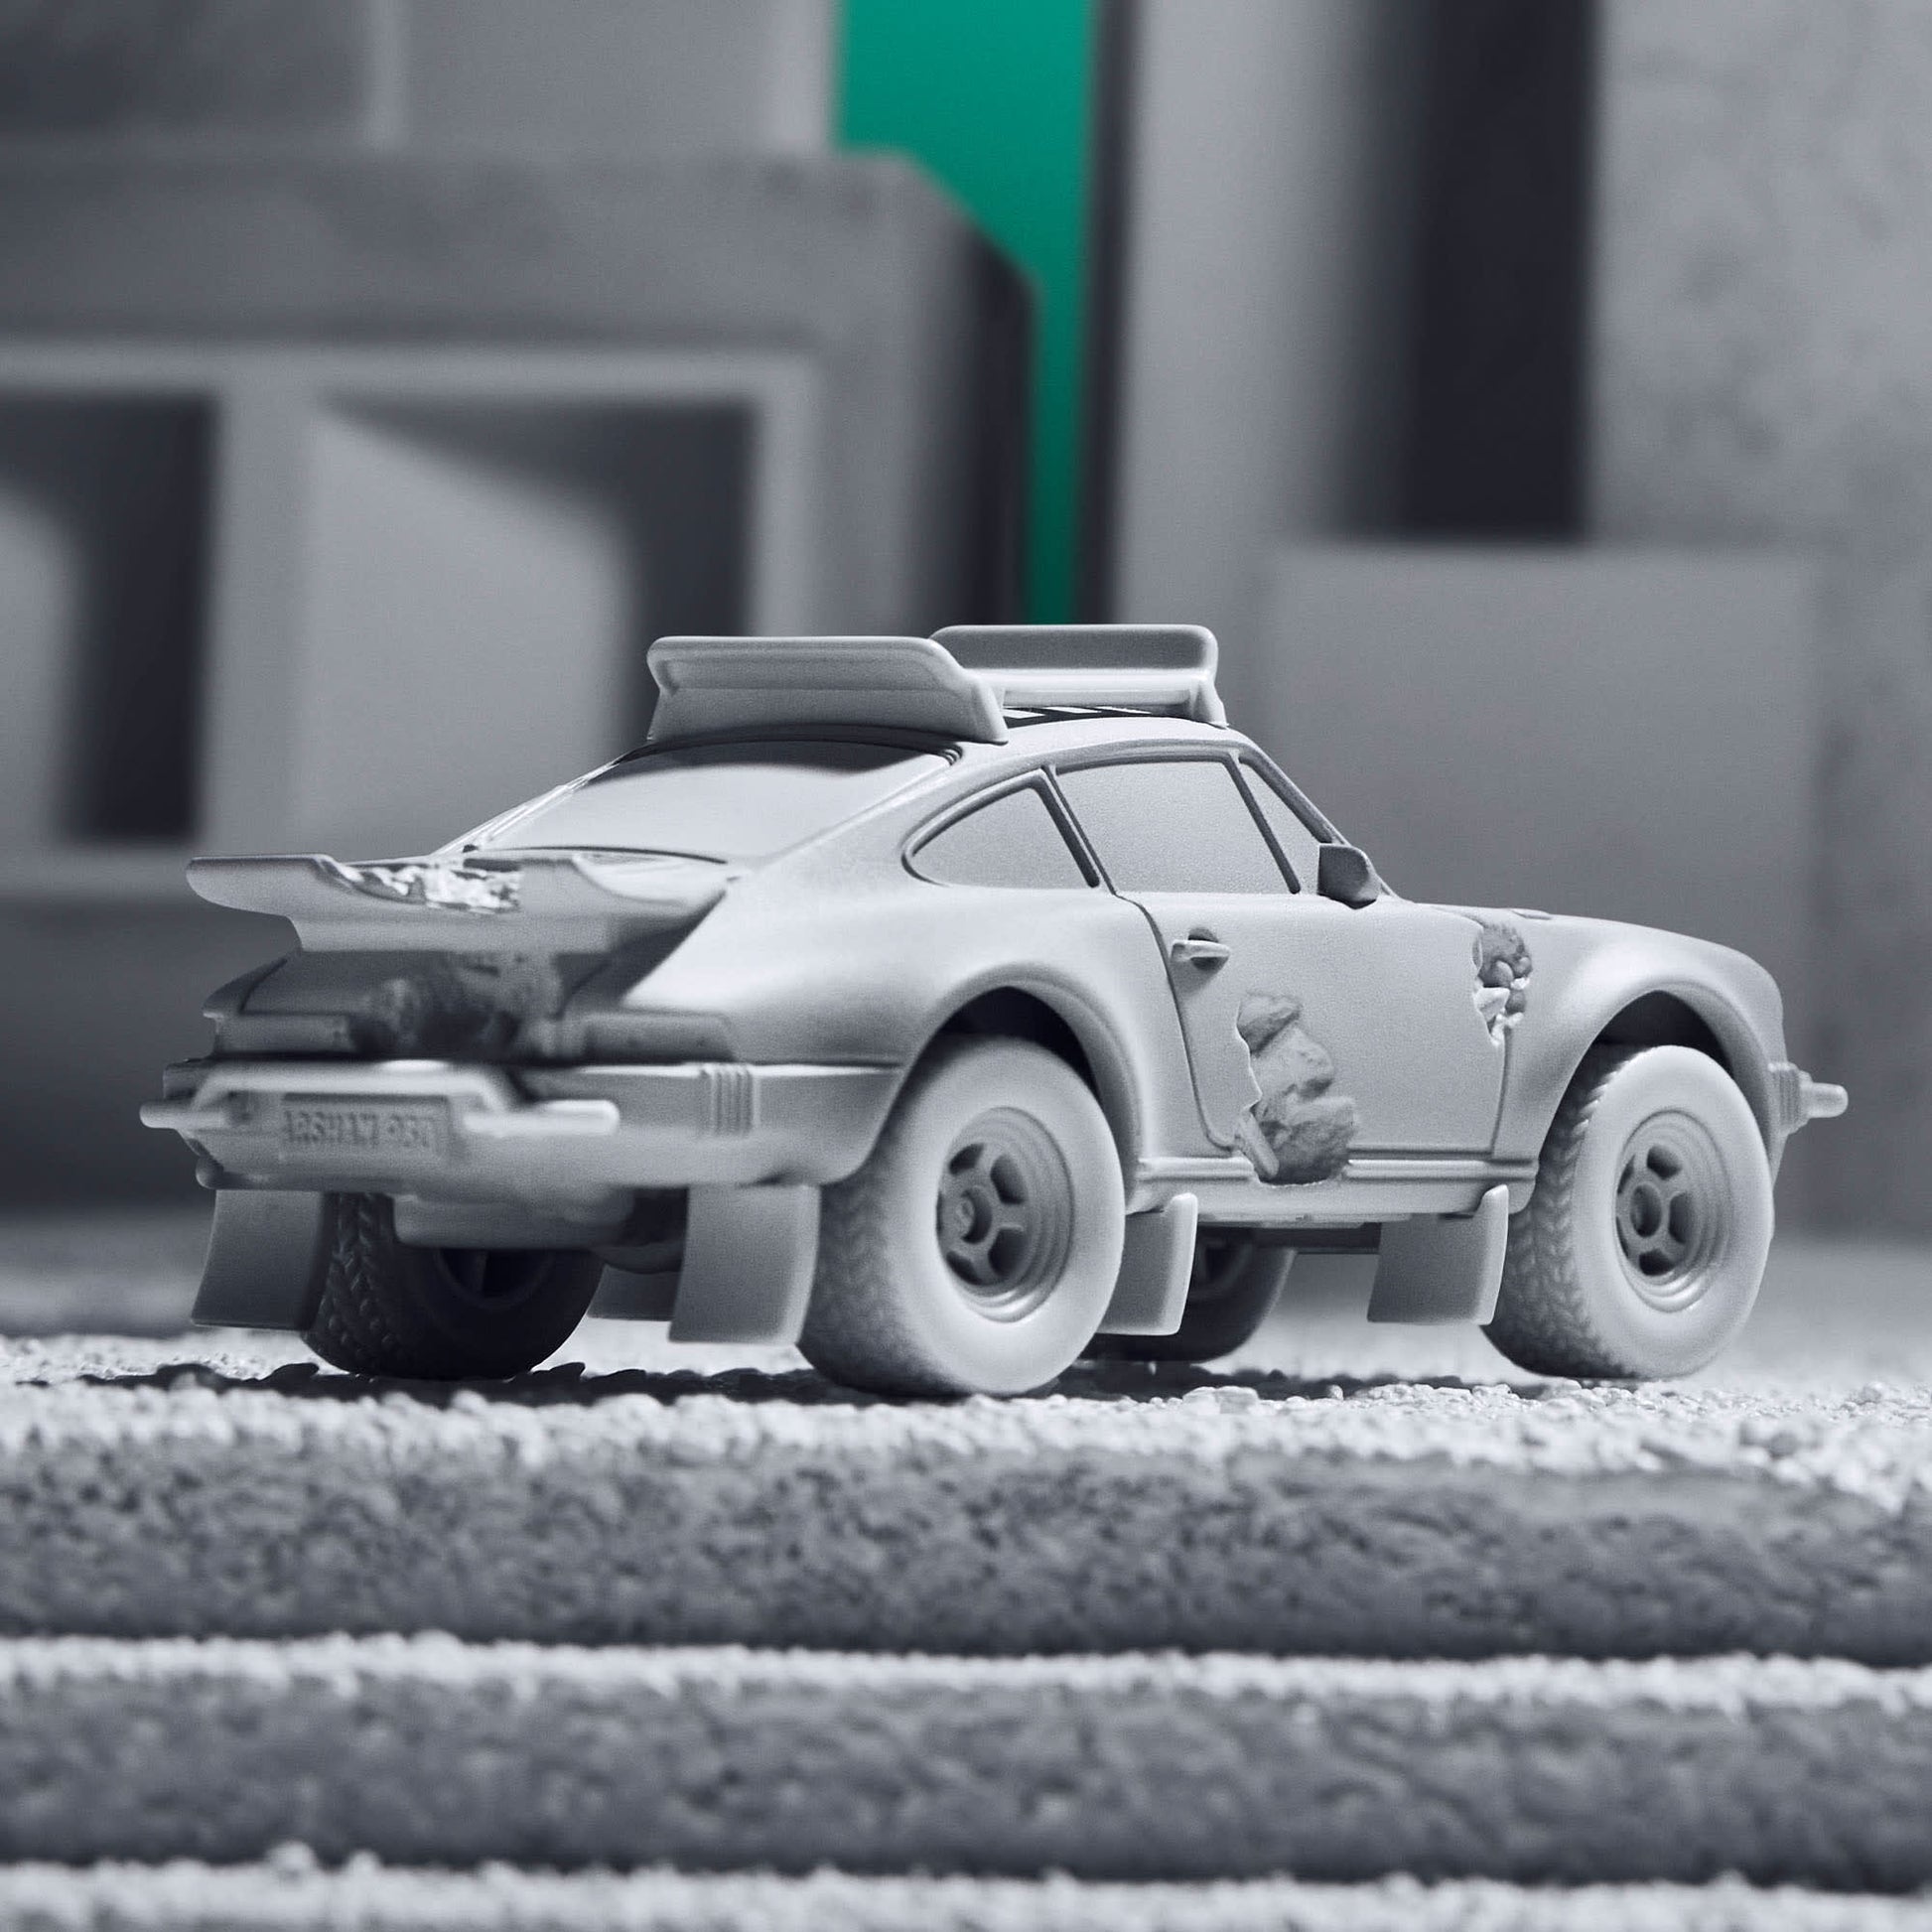 Features: Crystallized erosions Body Color: Arsham Grey Body Type: Silkstone Chassis: ZAMAC Wheels: Real Riders 5-spoke mag wheels  Scale 1:64 Includes sealing label and Certificate of Authenticity Packaged in a collector display case 